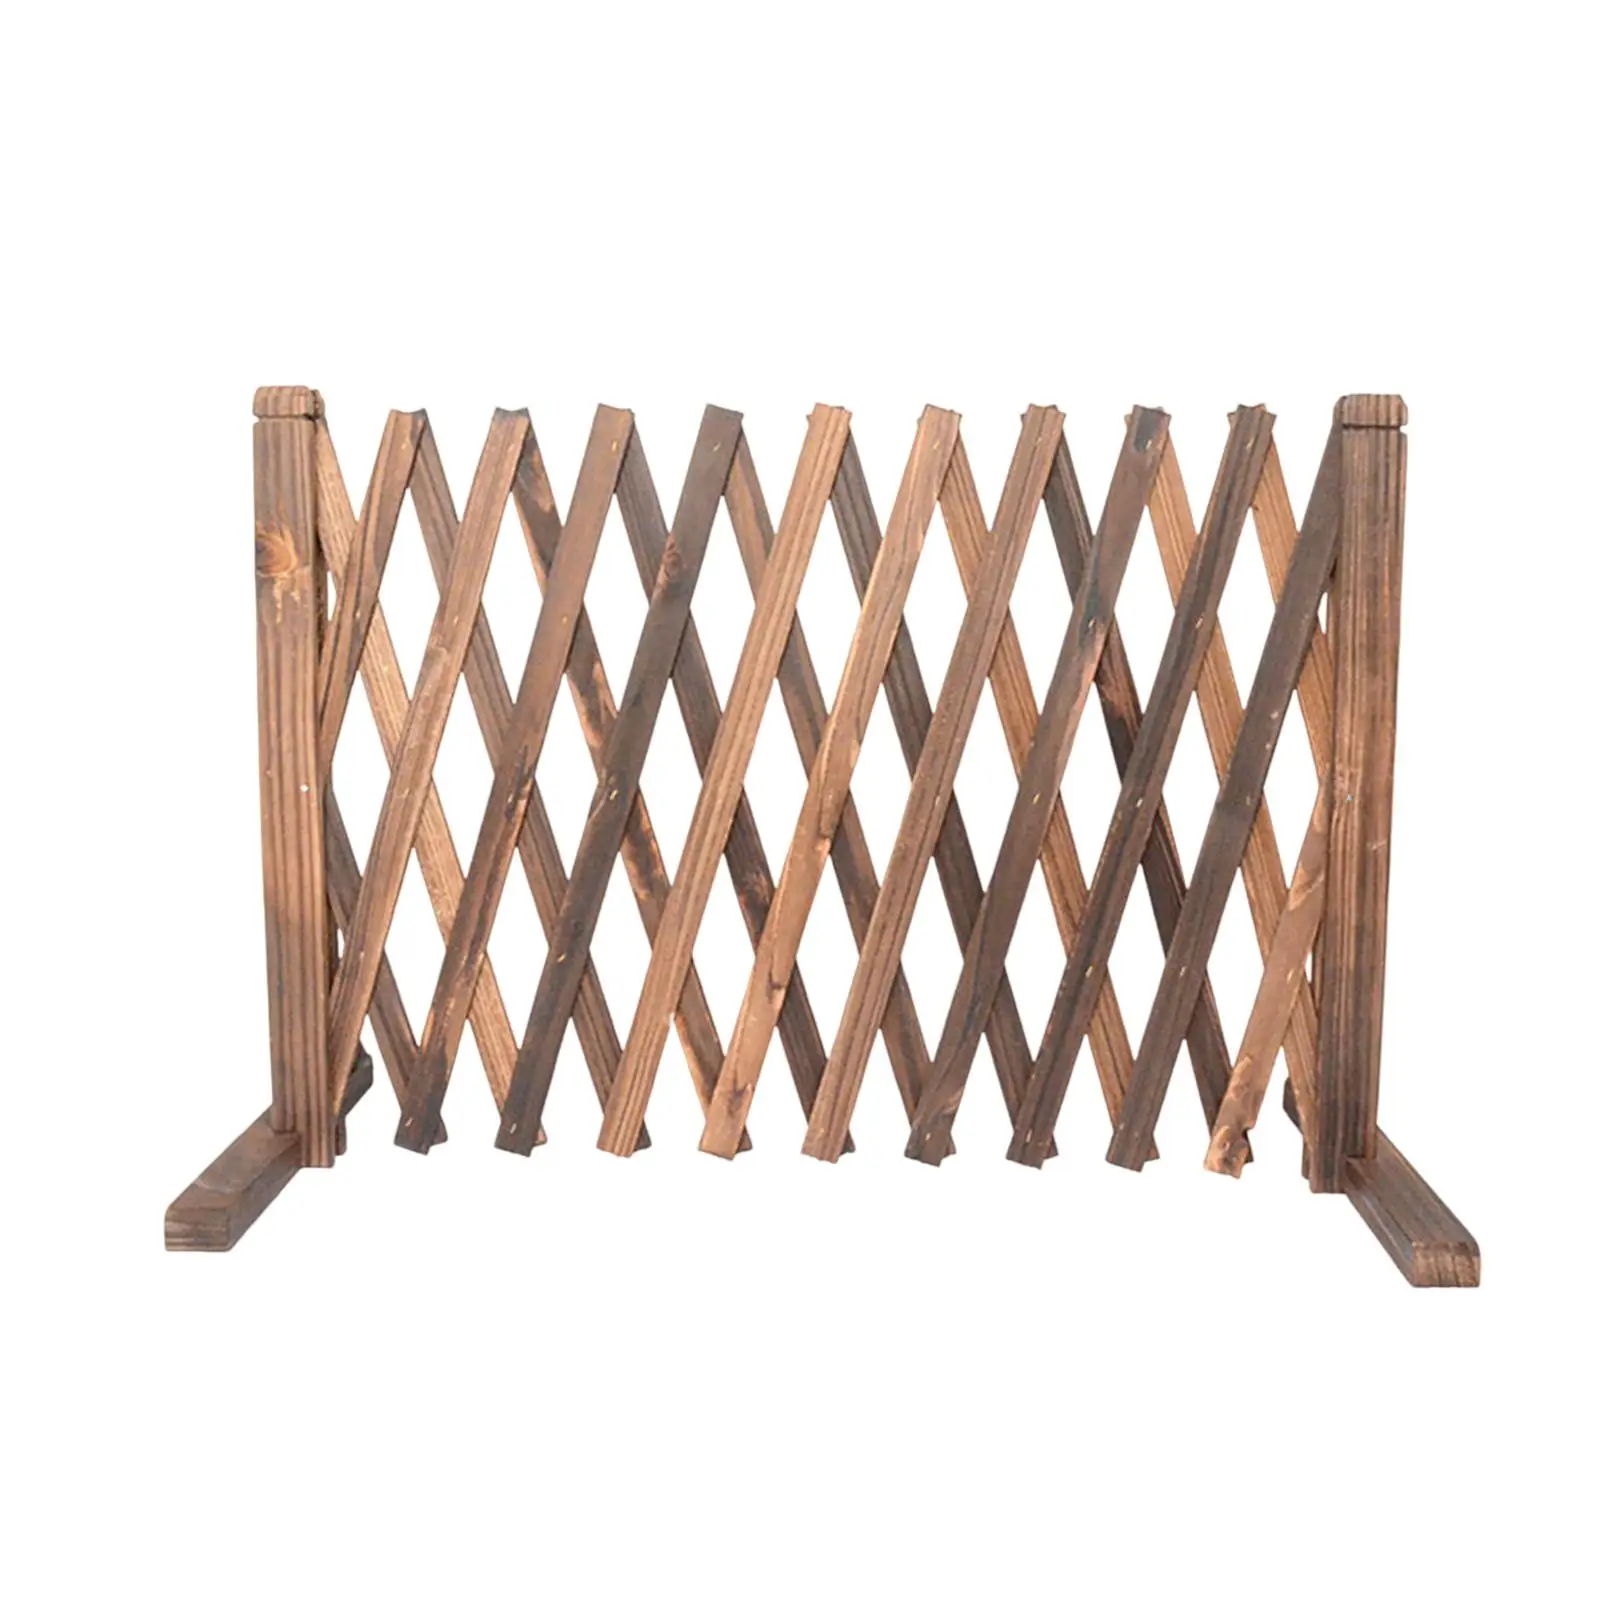 Expandable Wood Fence Photo Props Foldable Garden Screen Panel Lattice Fence Photo Background for Home Balcony Outdoor Garden